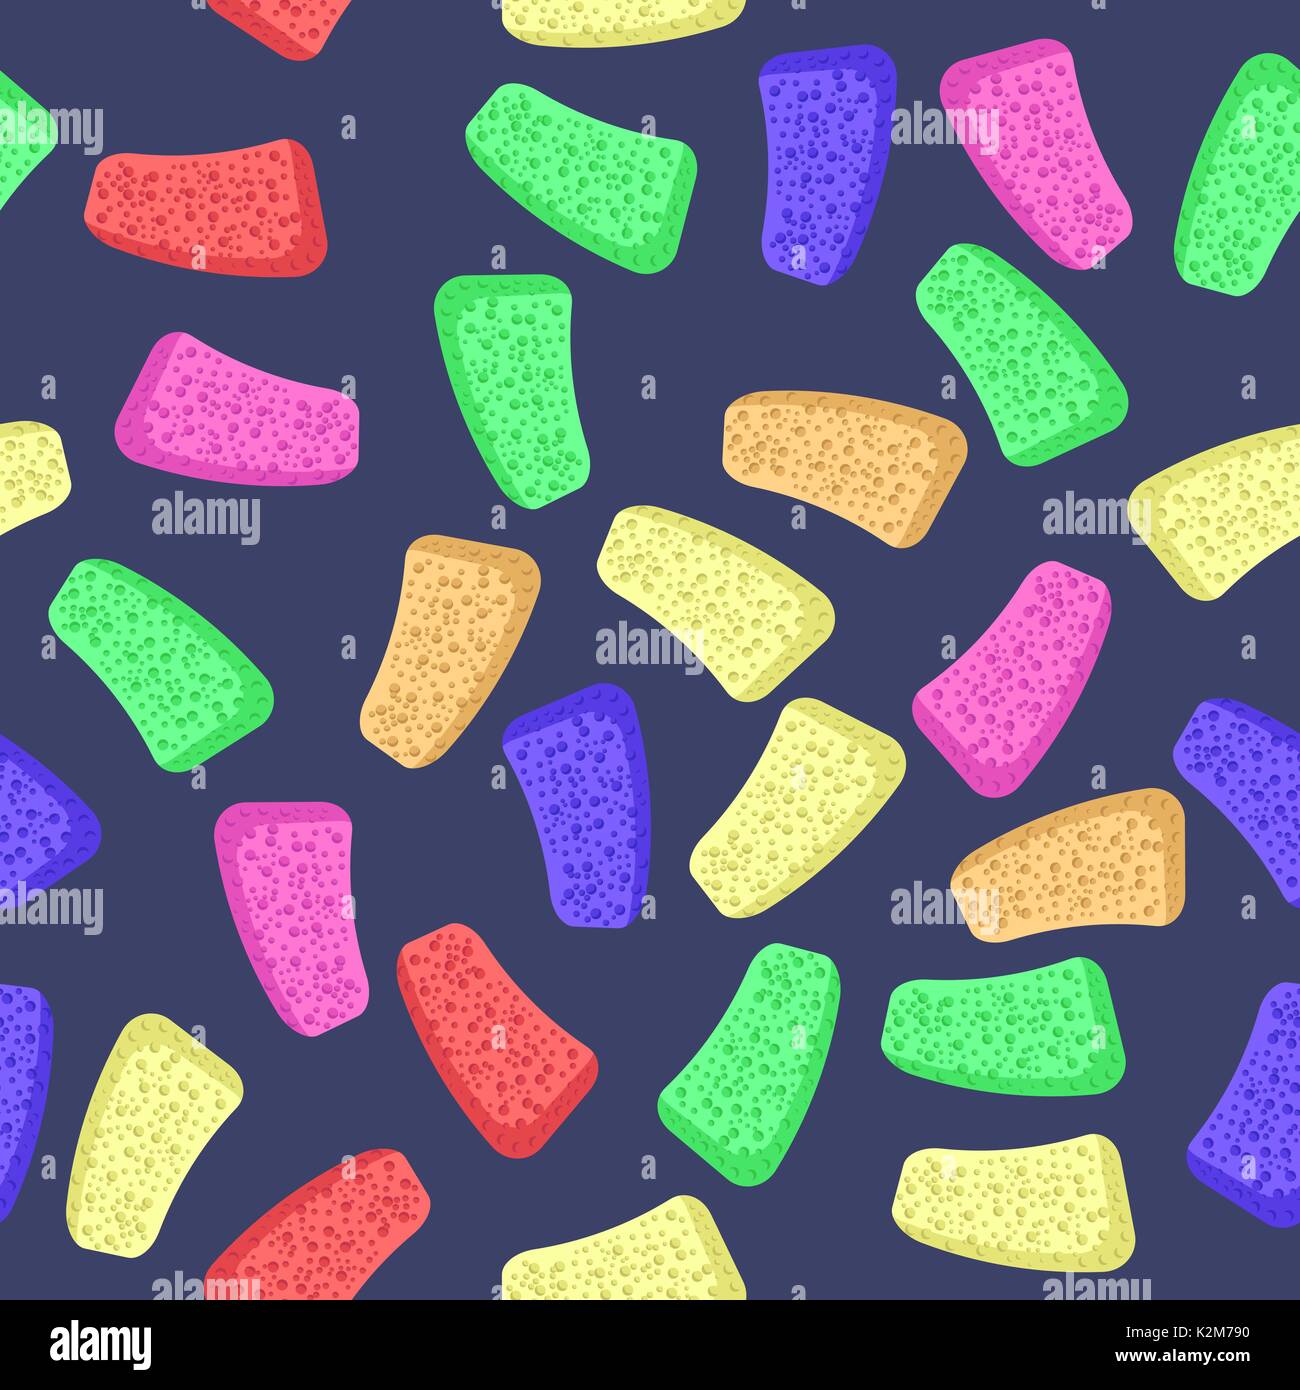 Set of Colorful Bath Sponges Seamless Pattern Stock Vector